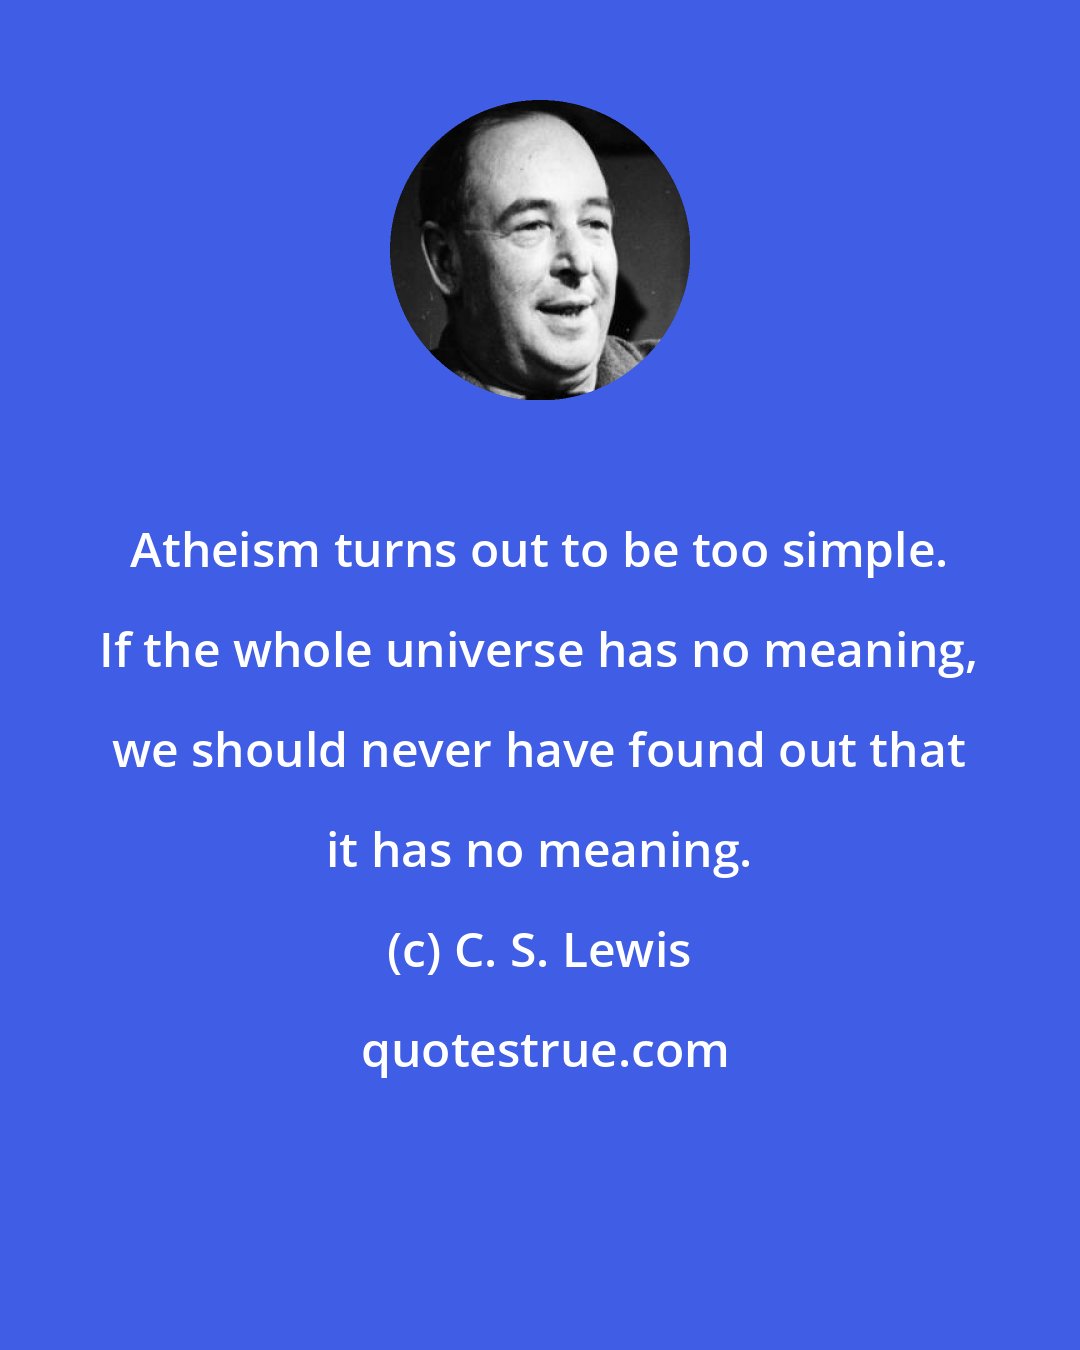 C. S. Lewis: Atheism turns out to be too simple. If the whole universe has no meaning, we should never have found out that it has no meaning.